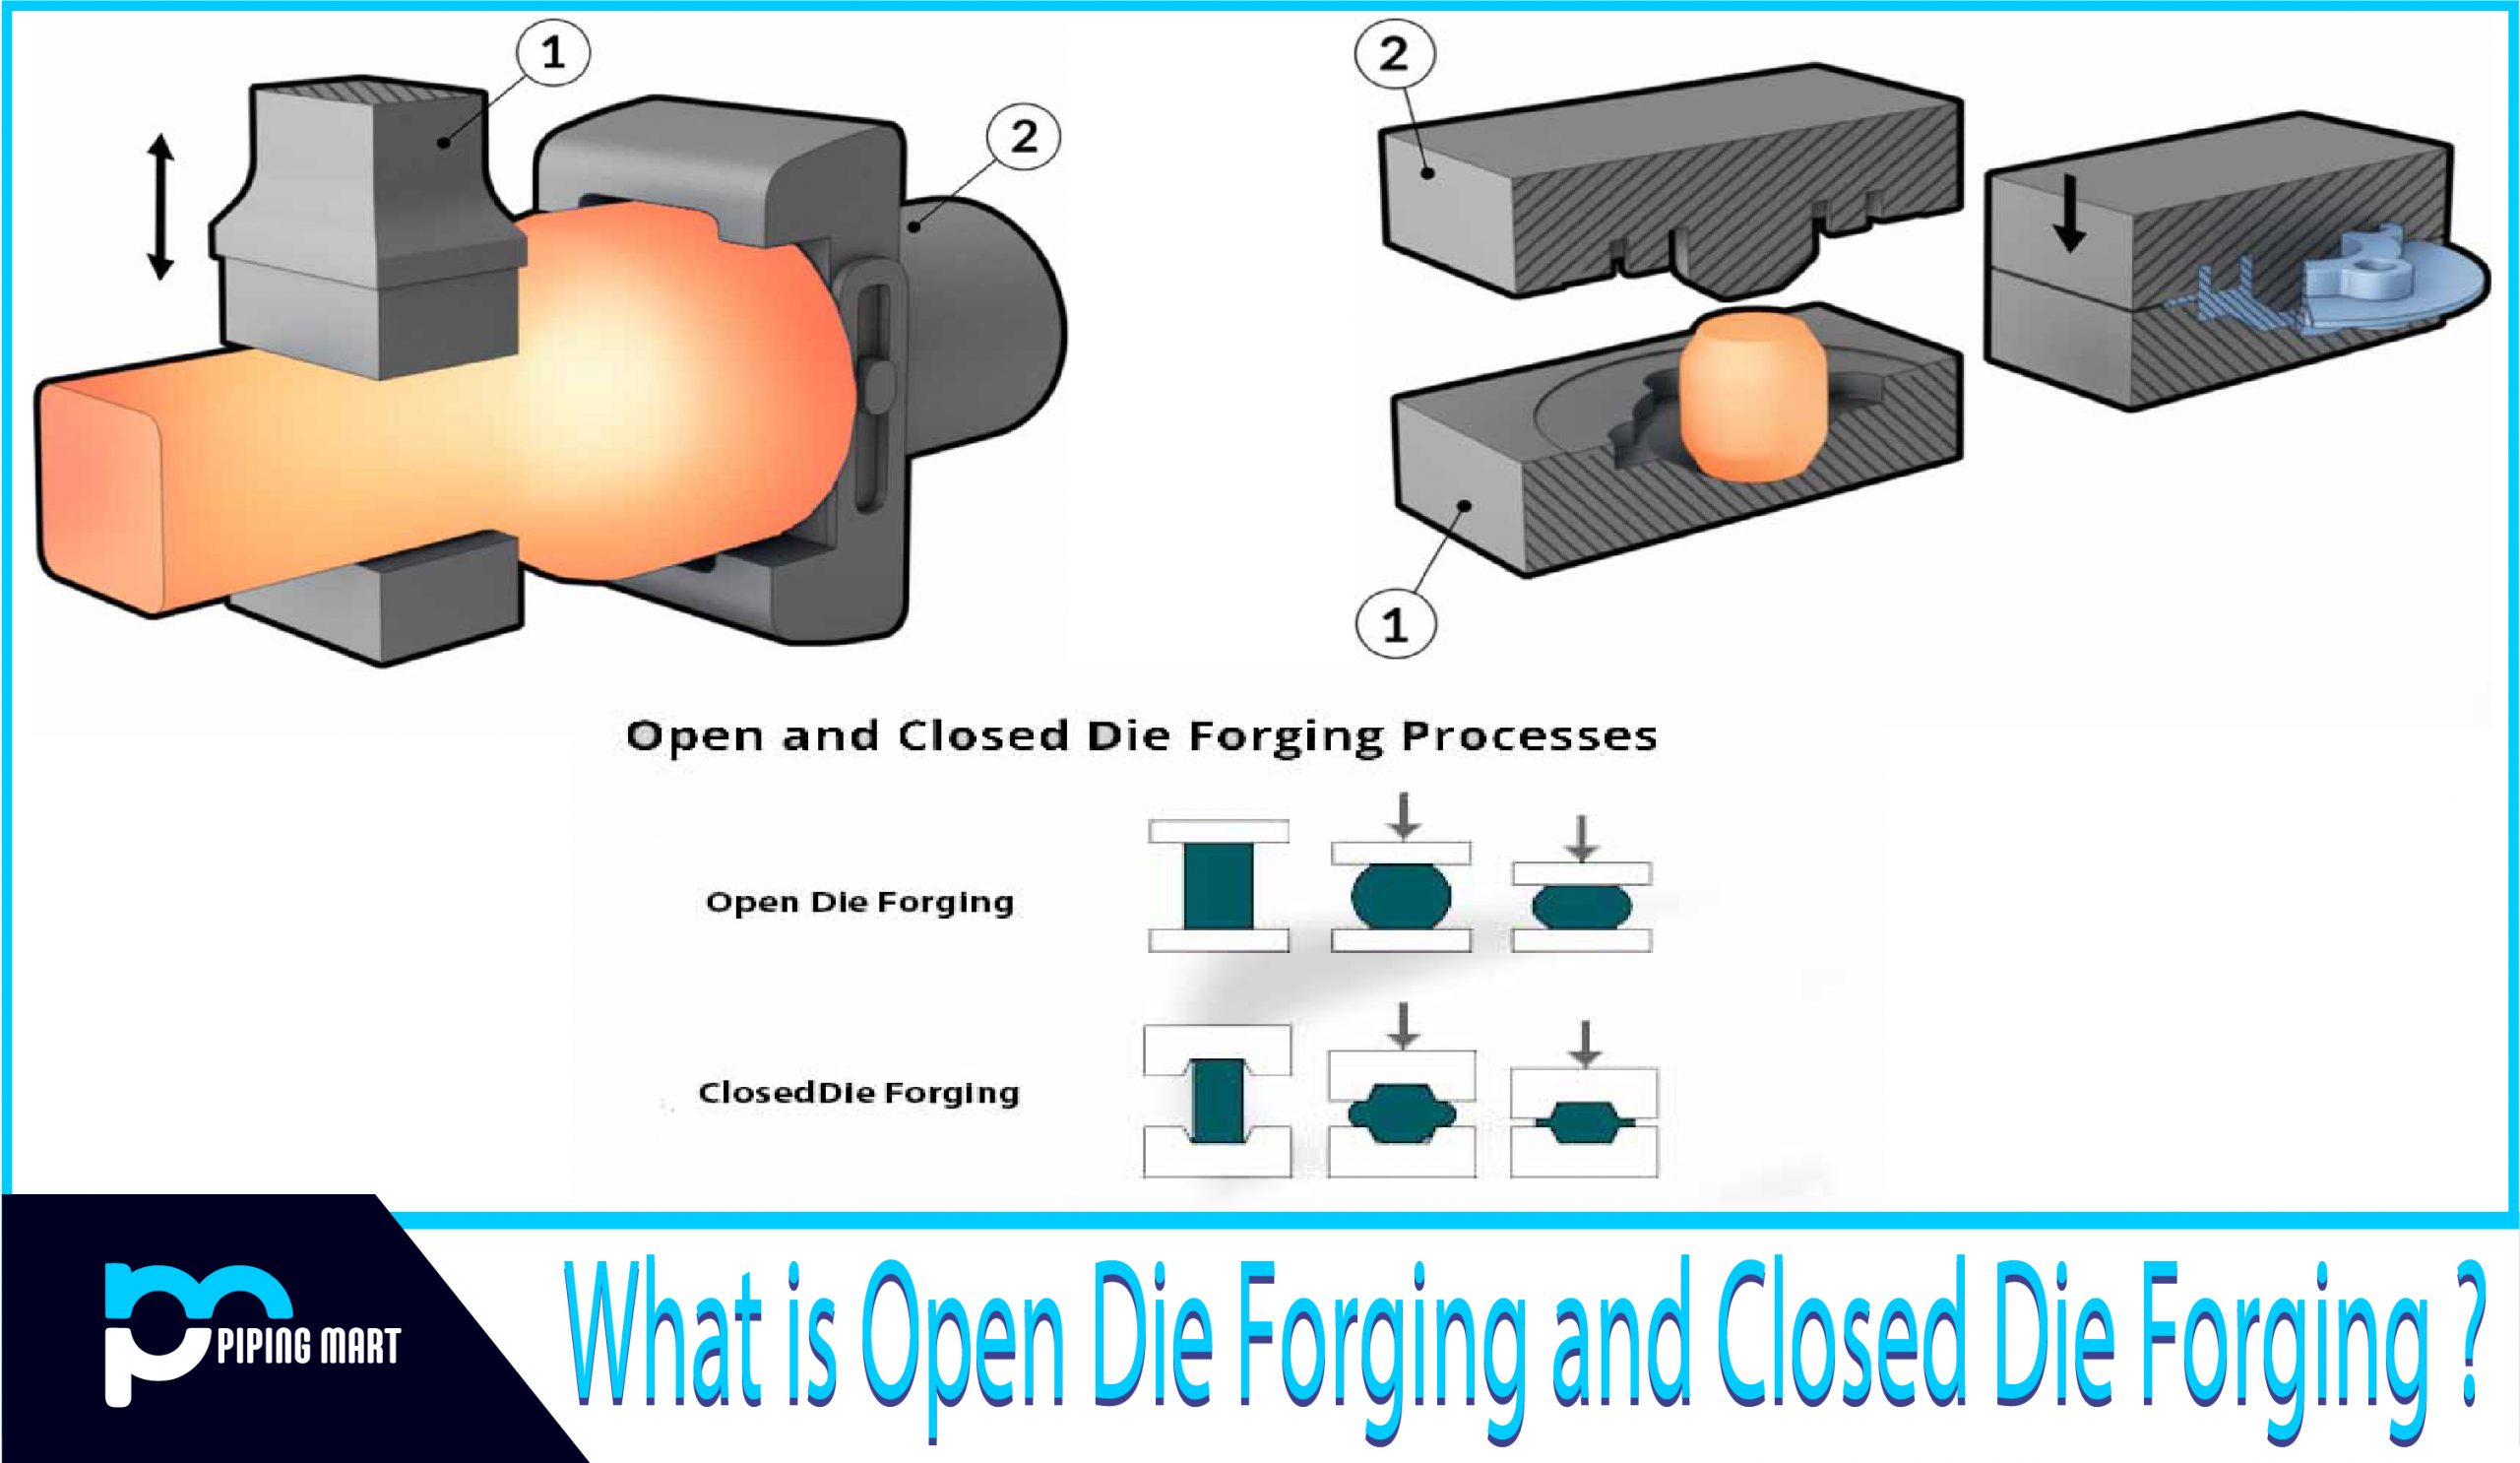 What is Open Die Forging and Closed Die Forging?